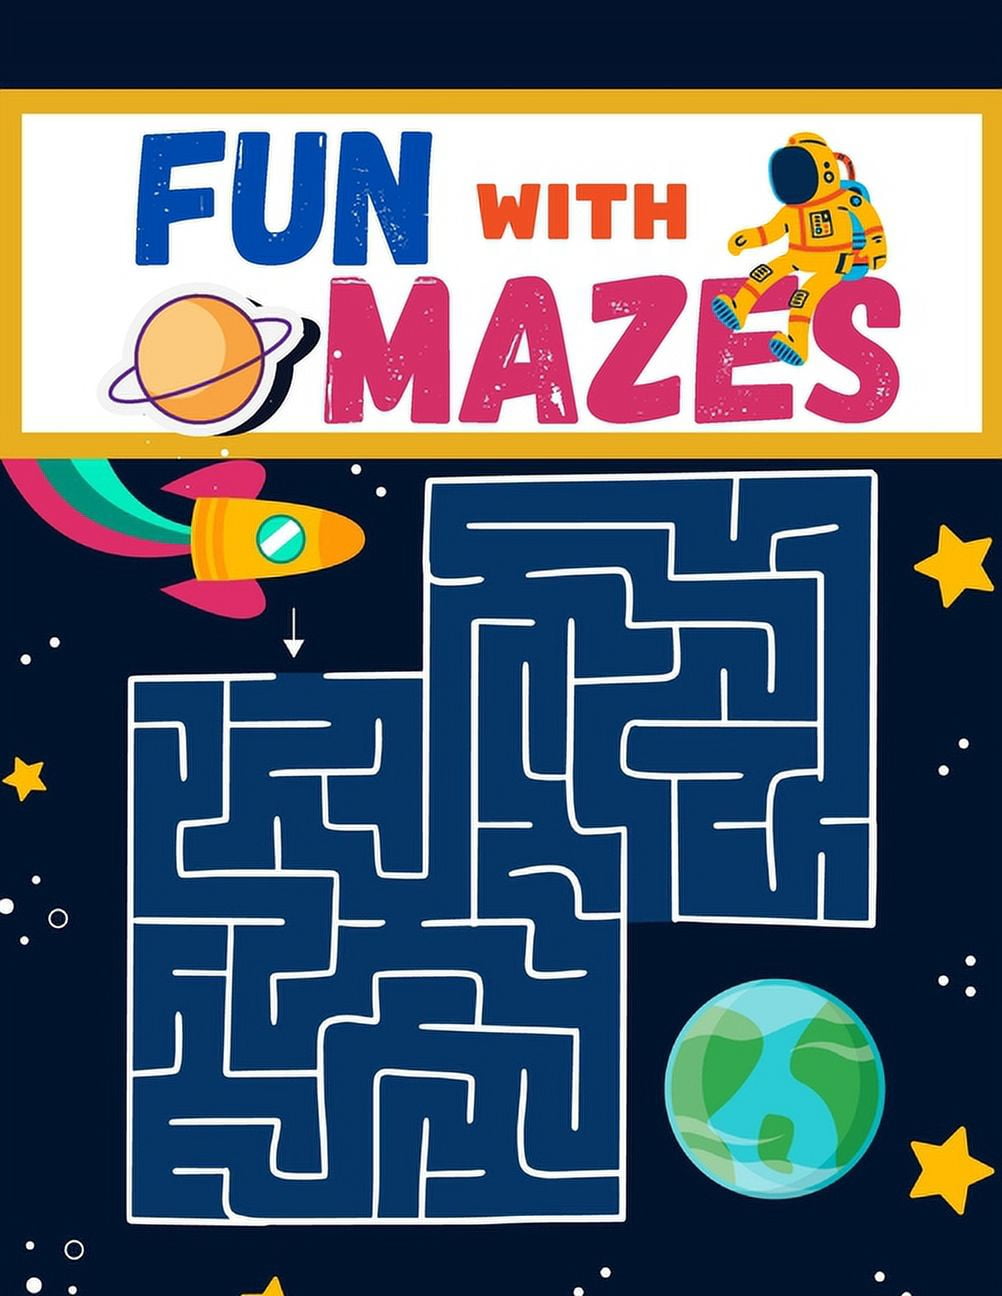 Big Christmas Mazes for Kids Ages 4-6: 100 Easy Maze Puzzles, Screen-Free  Fun, Great Gift Ideas for the Holidays, Activity Book: Tuiloma, Dawn:  9798870561967: : Books